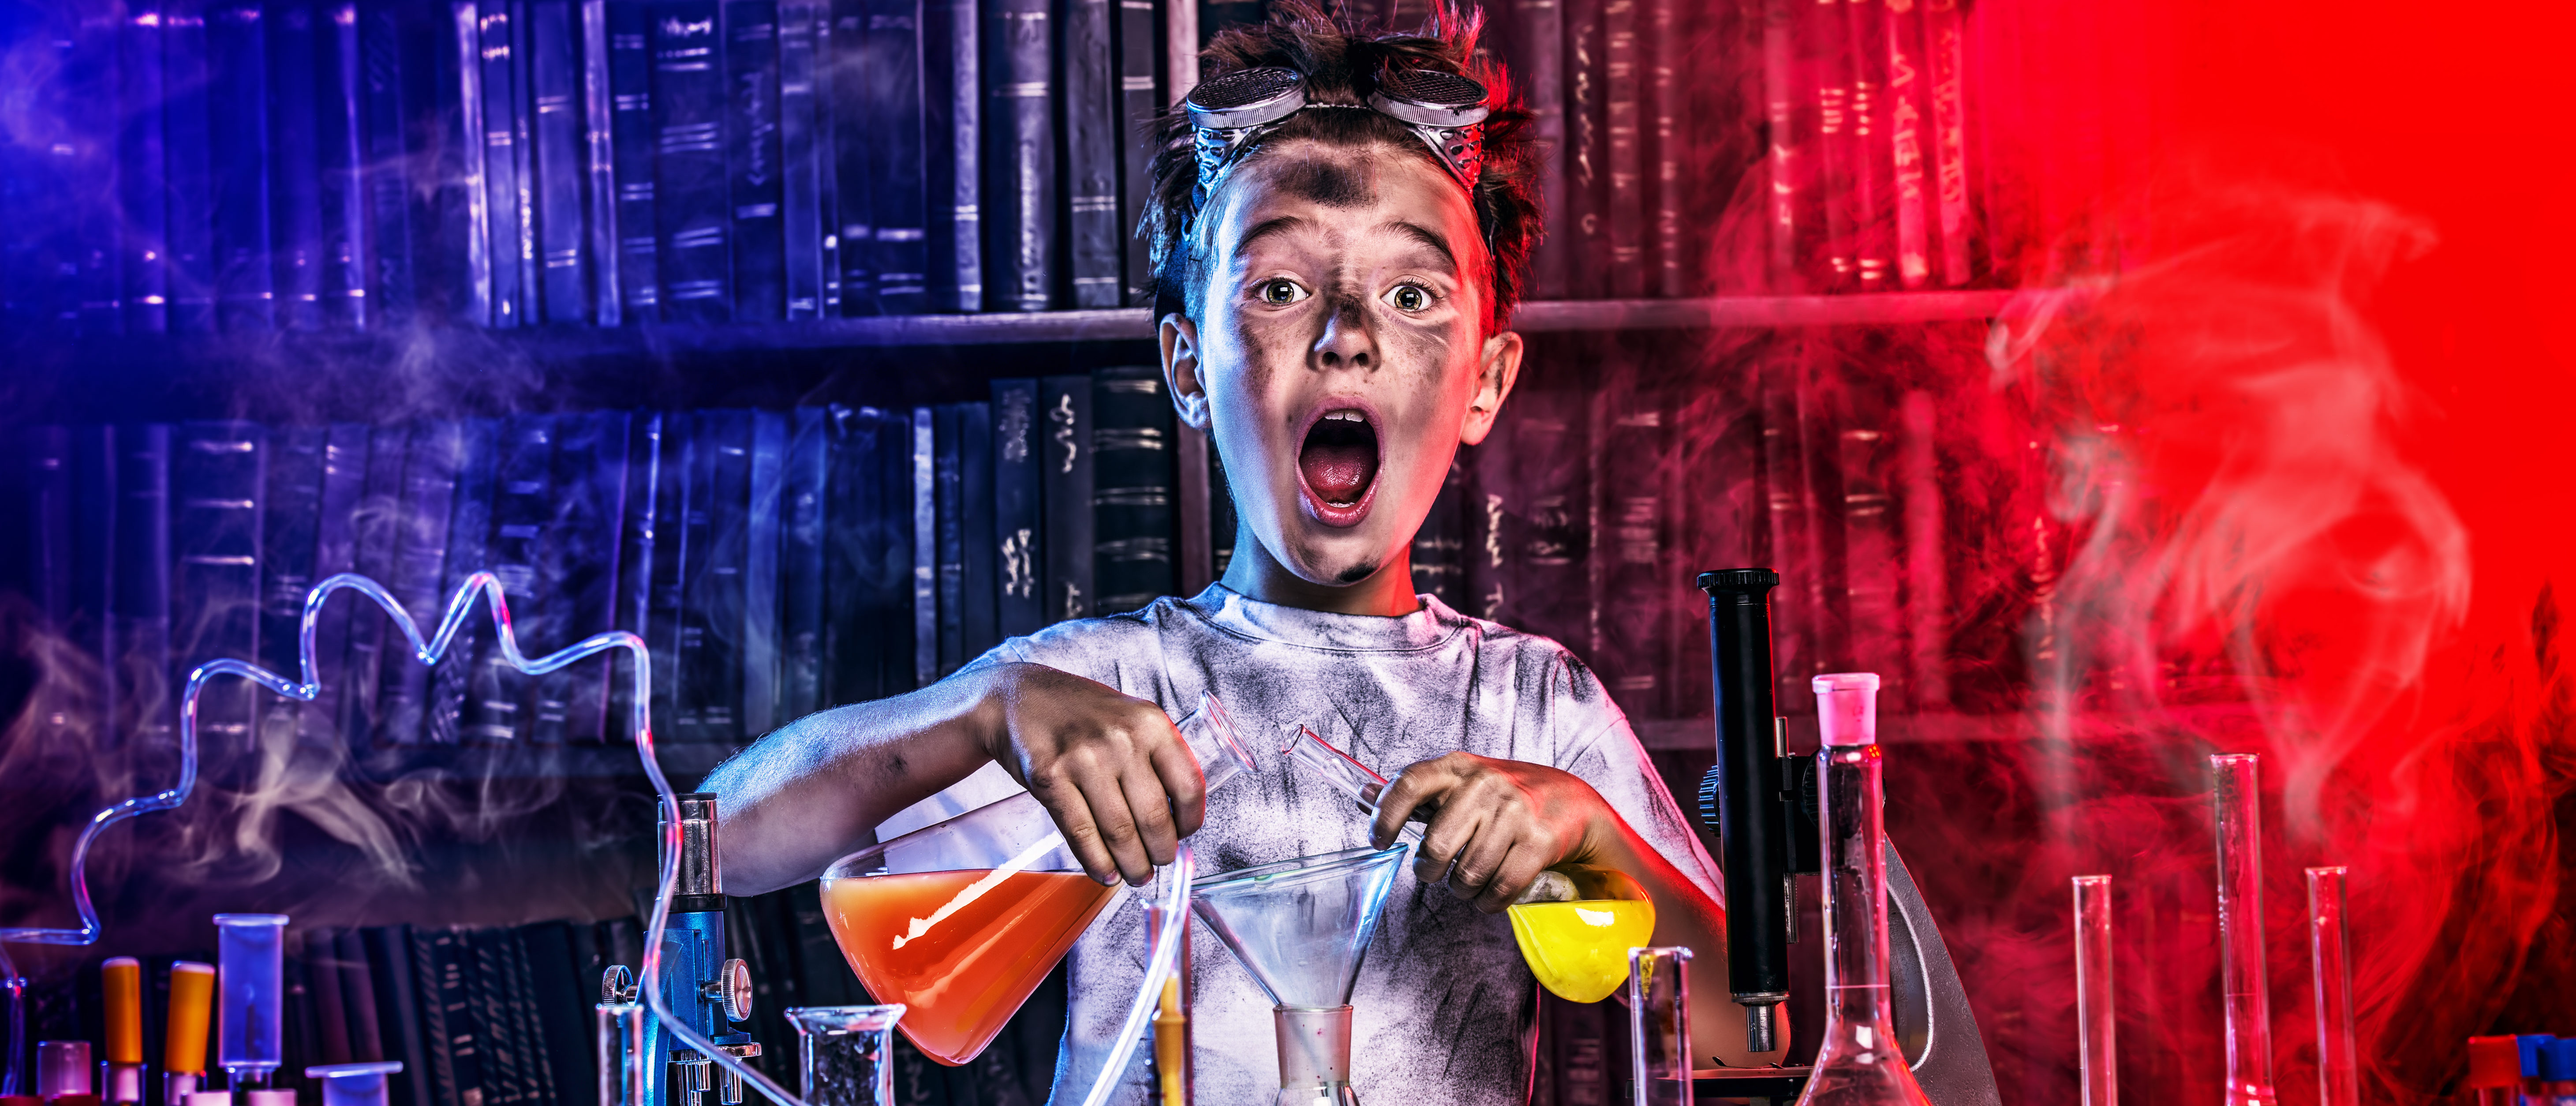 A boy doing experiments in the laboratory. Explosion in the laboratory. (Shutterstock/Kiselev Andrey Valerevich) | Liberals Fuming Over Atlantic's New Hire